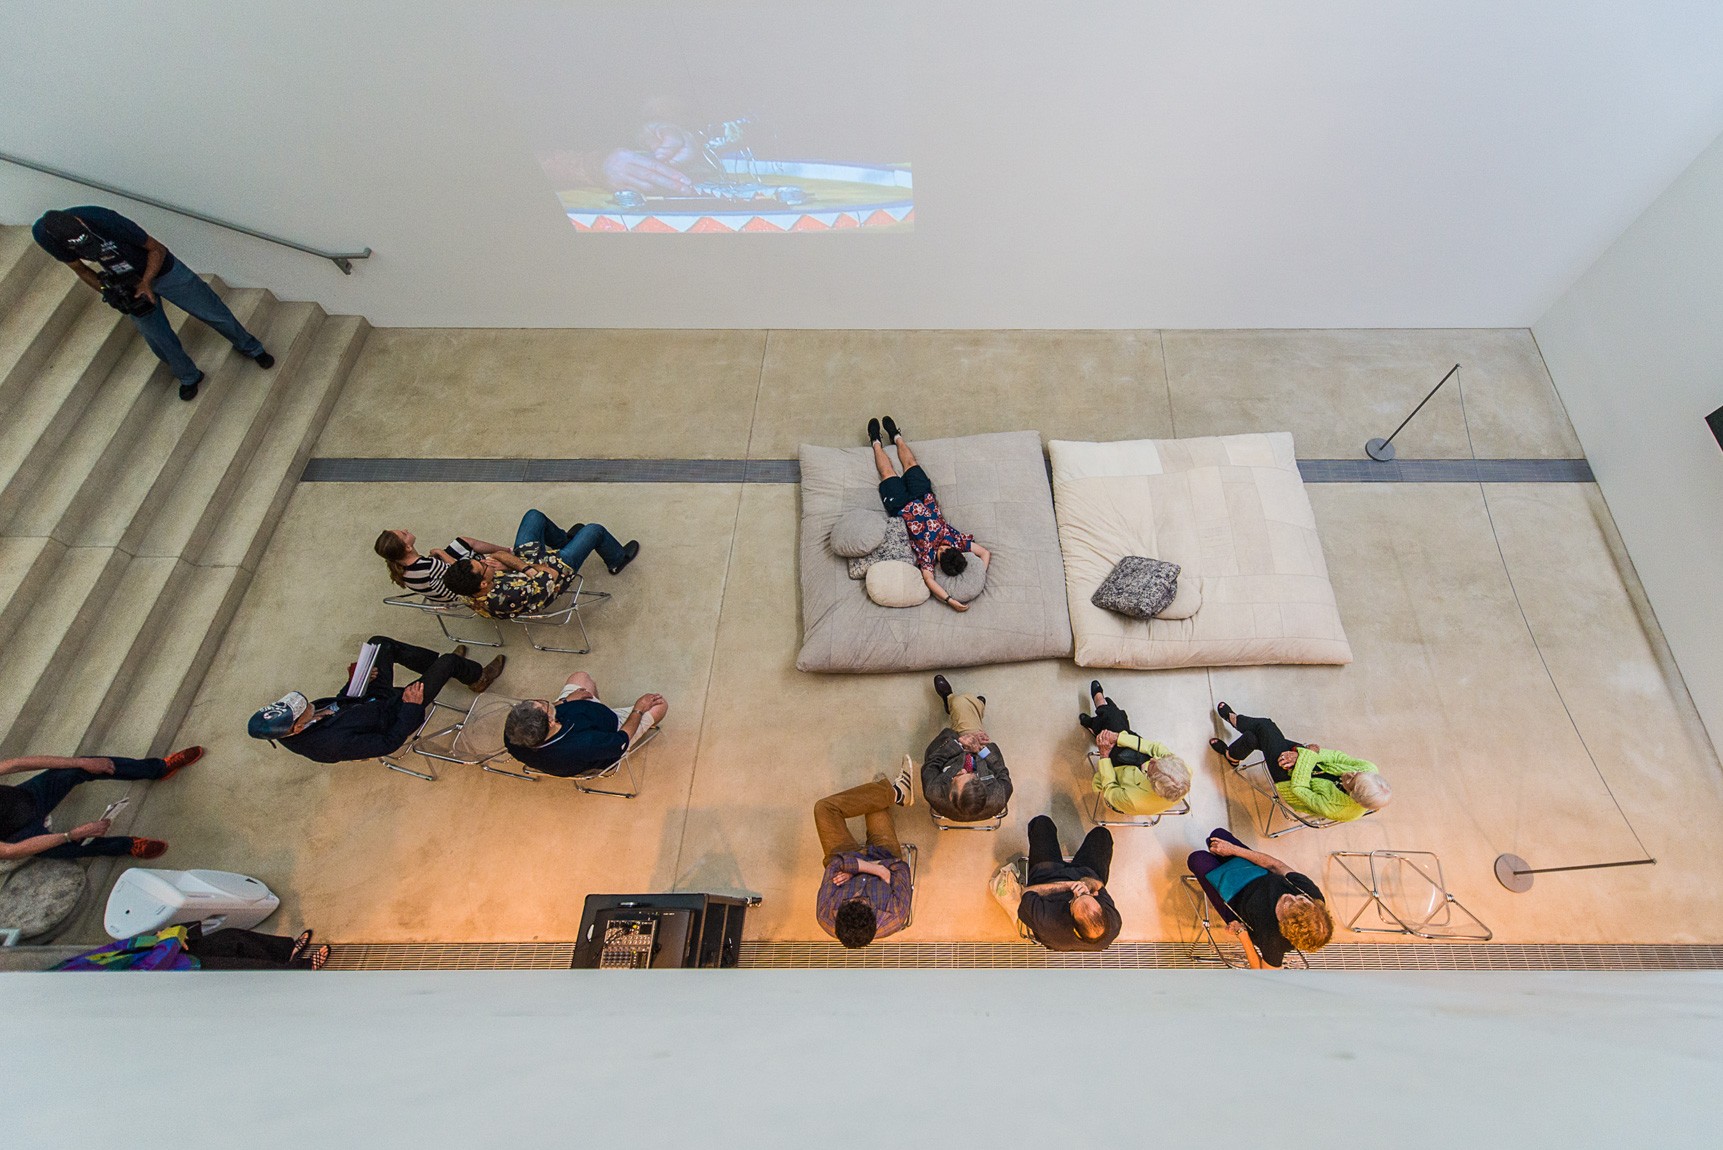 An aerial view of an audience watching a film projected on the wall of the Lower-Main Gallery.